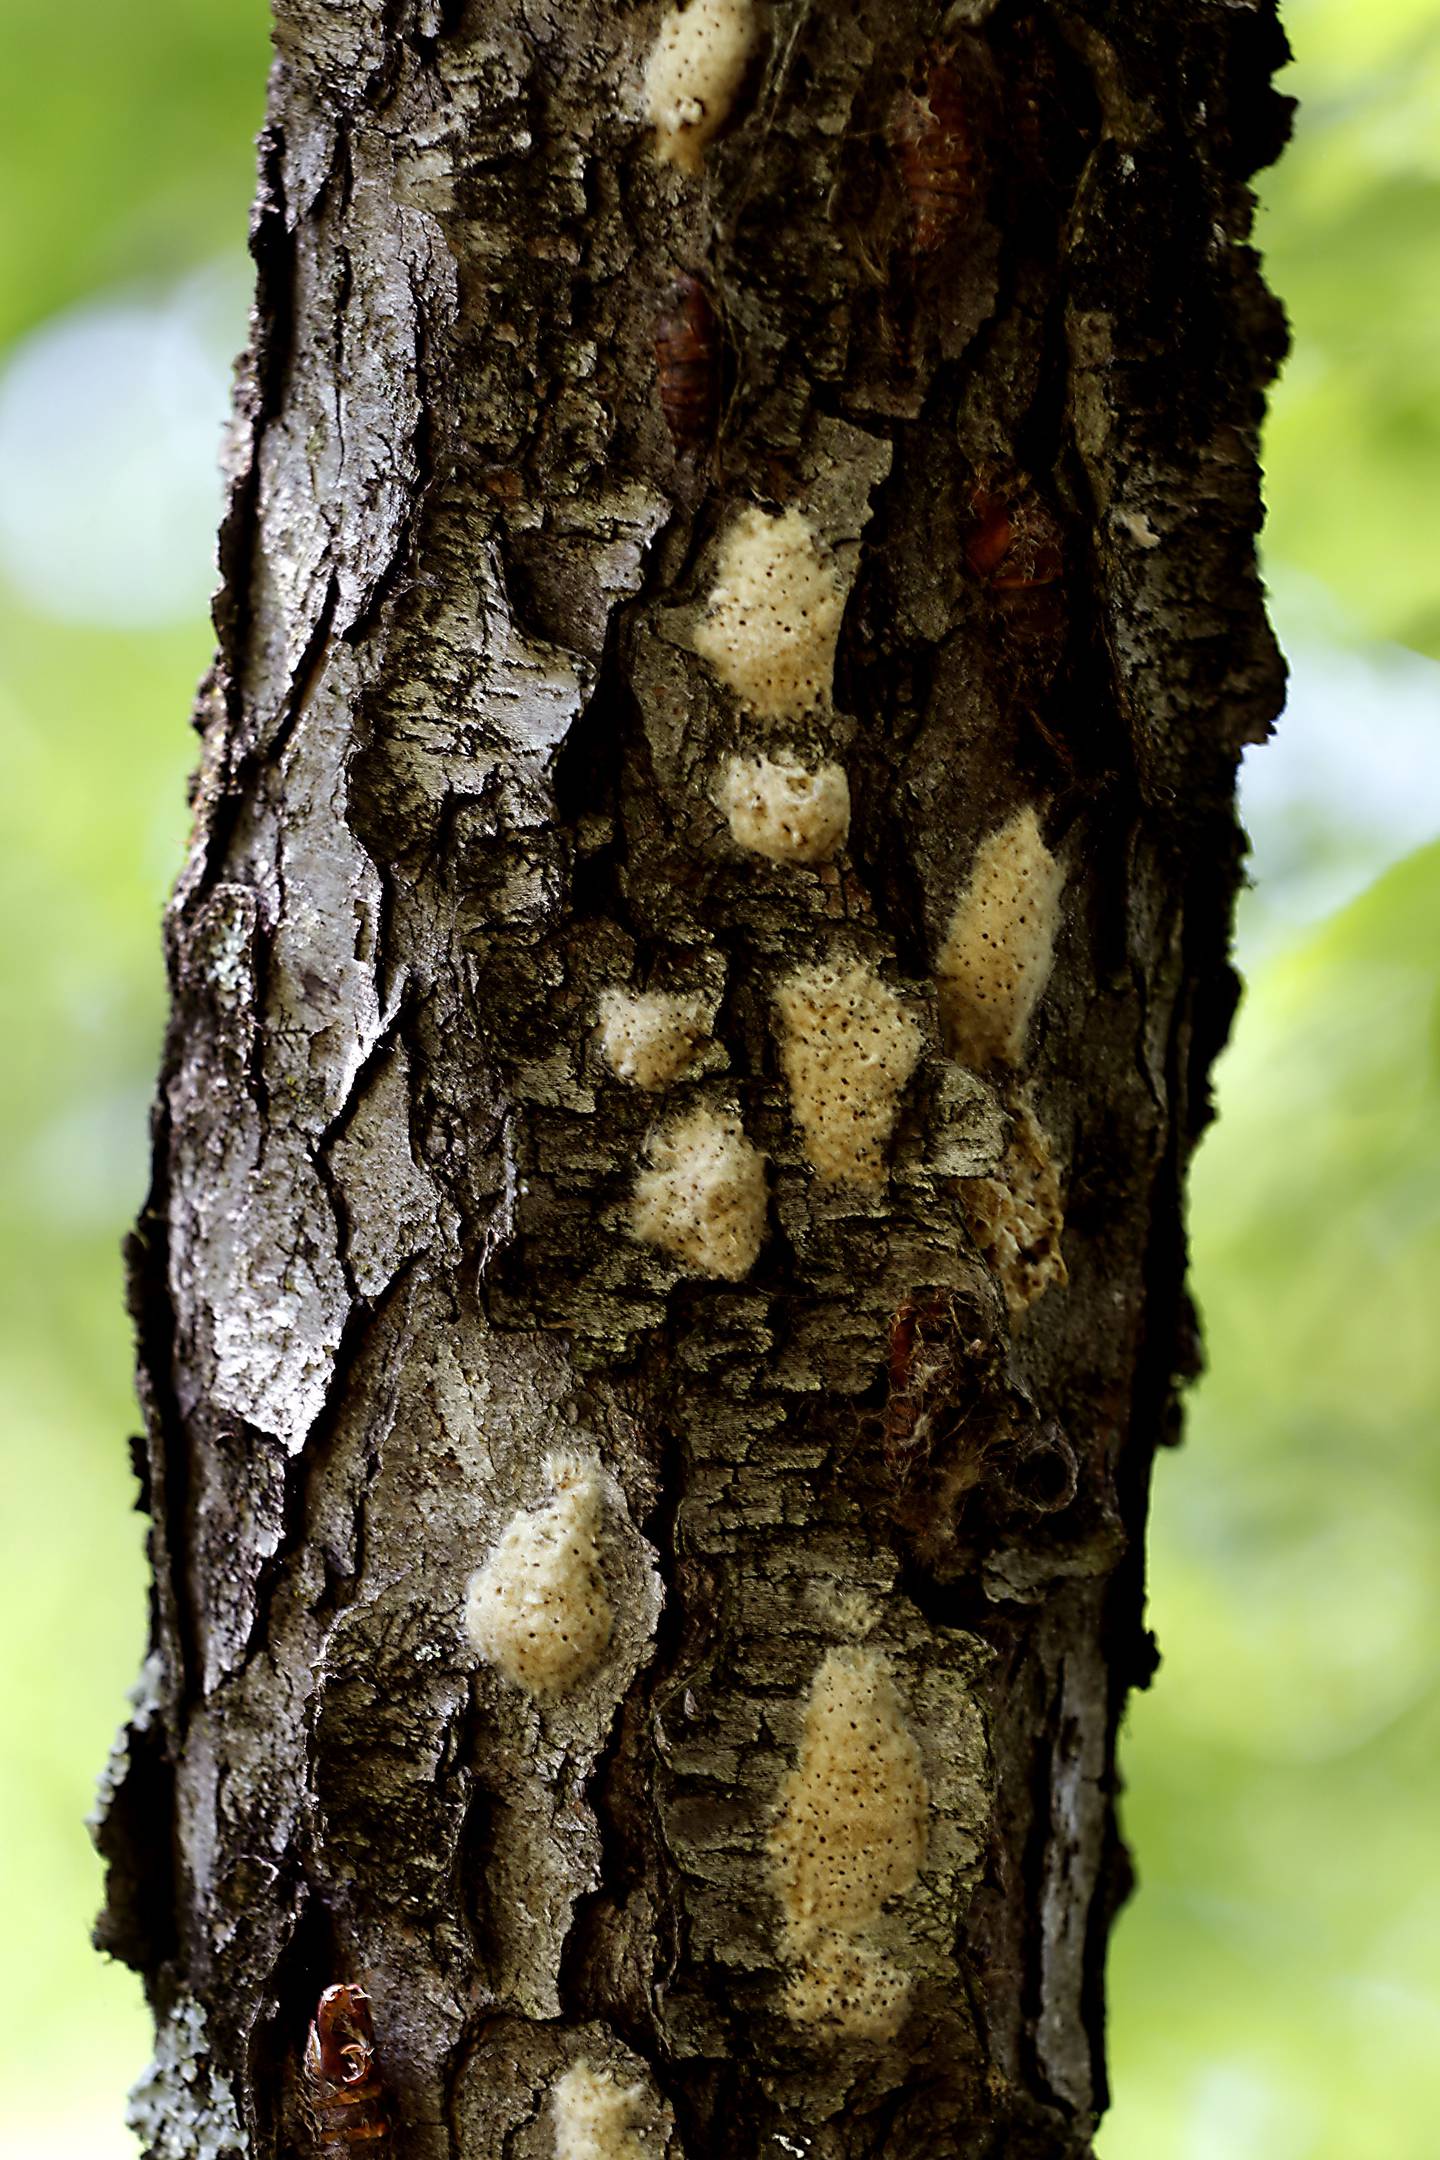 Spongy Moth egg sacks on a tree on Tuesday, May 23, 2023, near Frank Gualillo’s home. Spongy Moths are infesting many trees across McHenry County, resulting in damage, death and tree cut-downs.